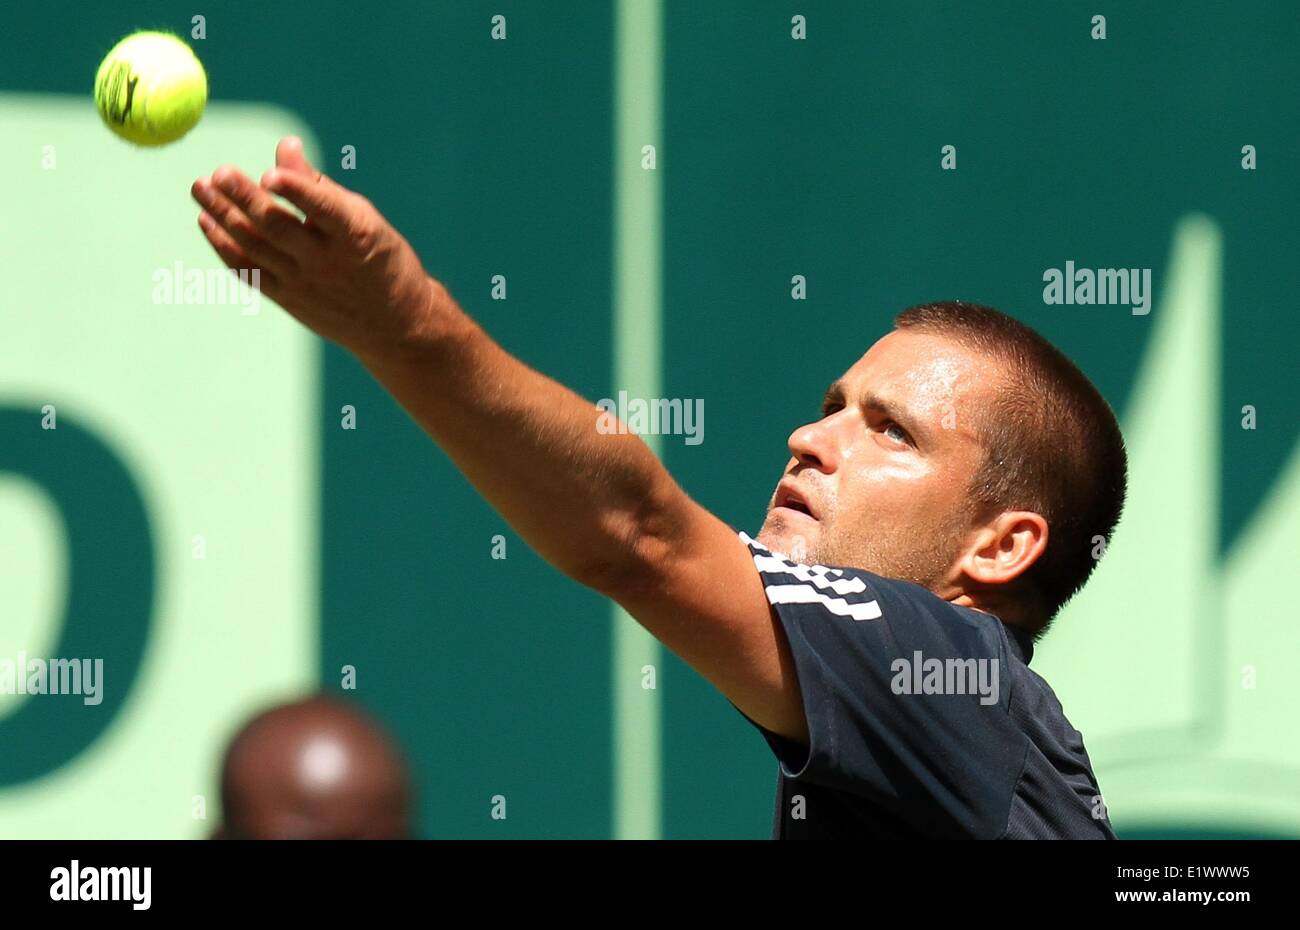 Russian tennis player Michail Michailowitsch Juschny in action during the match against Croatian tennis player Ivo Karlovic at the ATP tournament in Halle (Westphalia), Germany, 10 June 2014. Photo: OLIVER KRATO/dpa Stock Photo